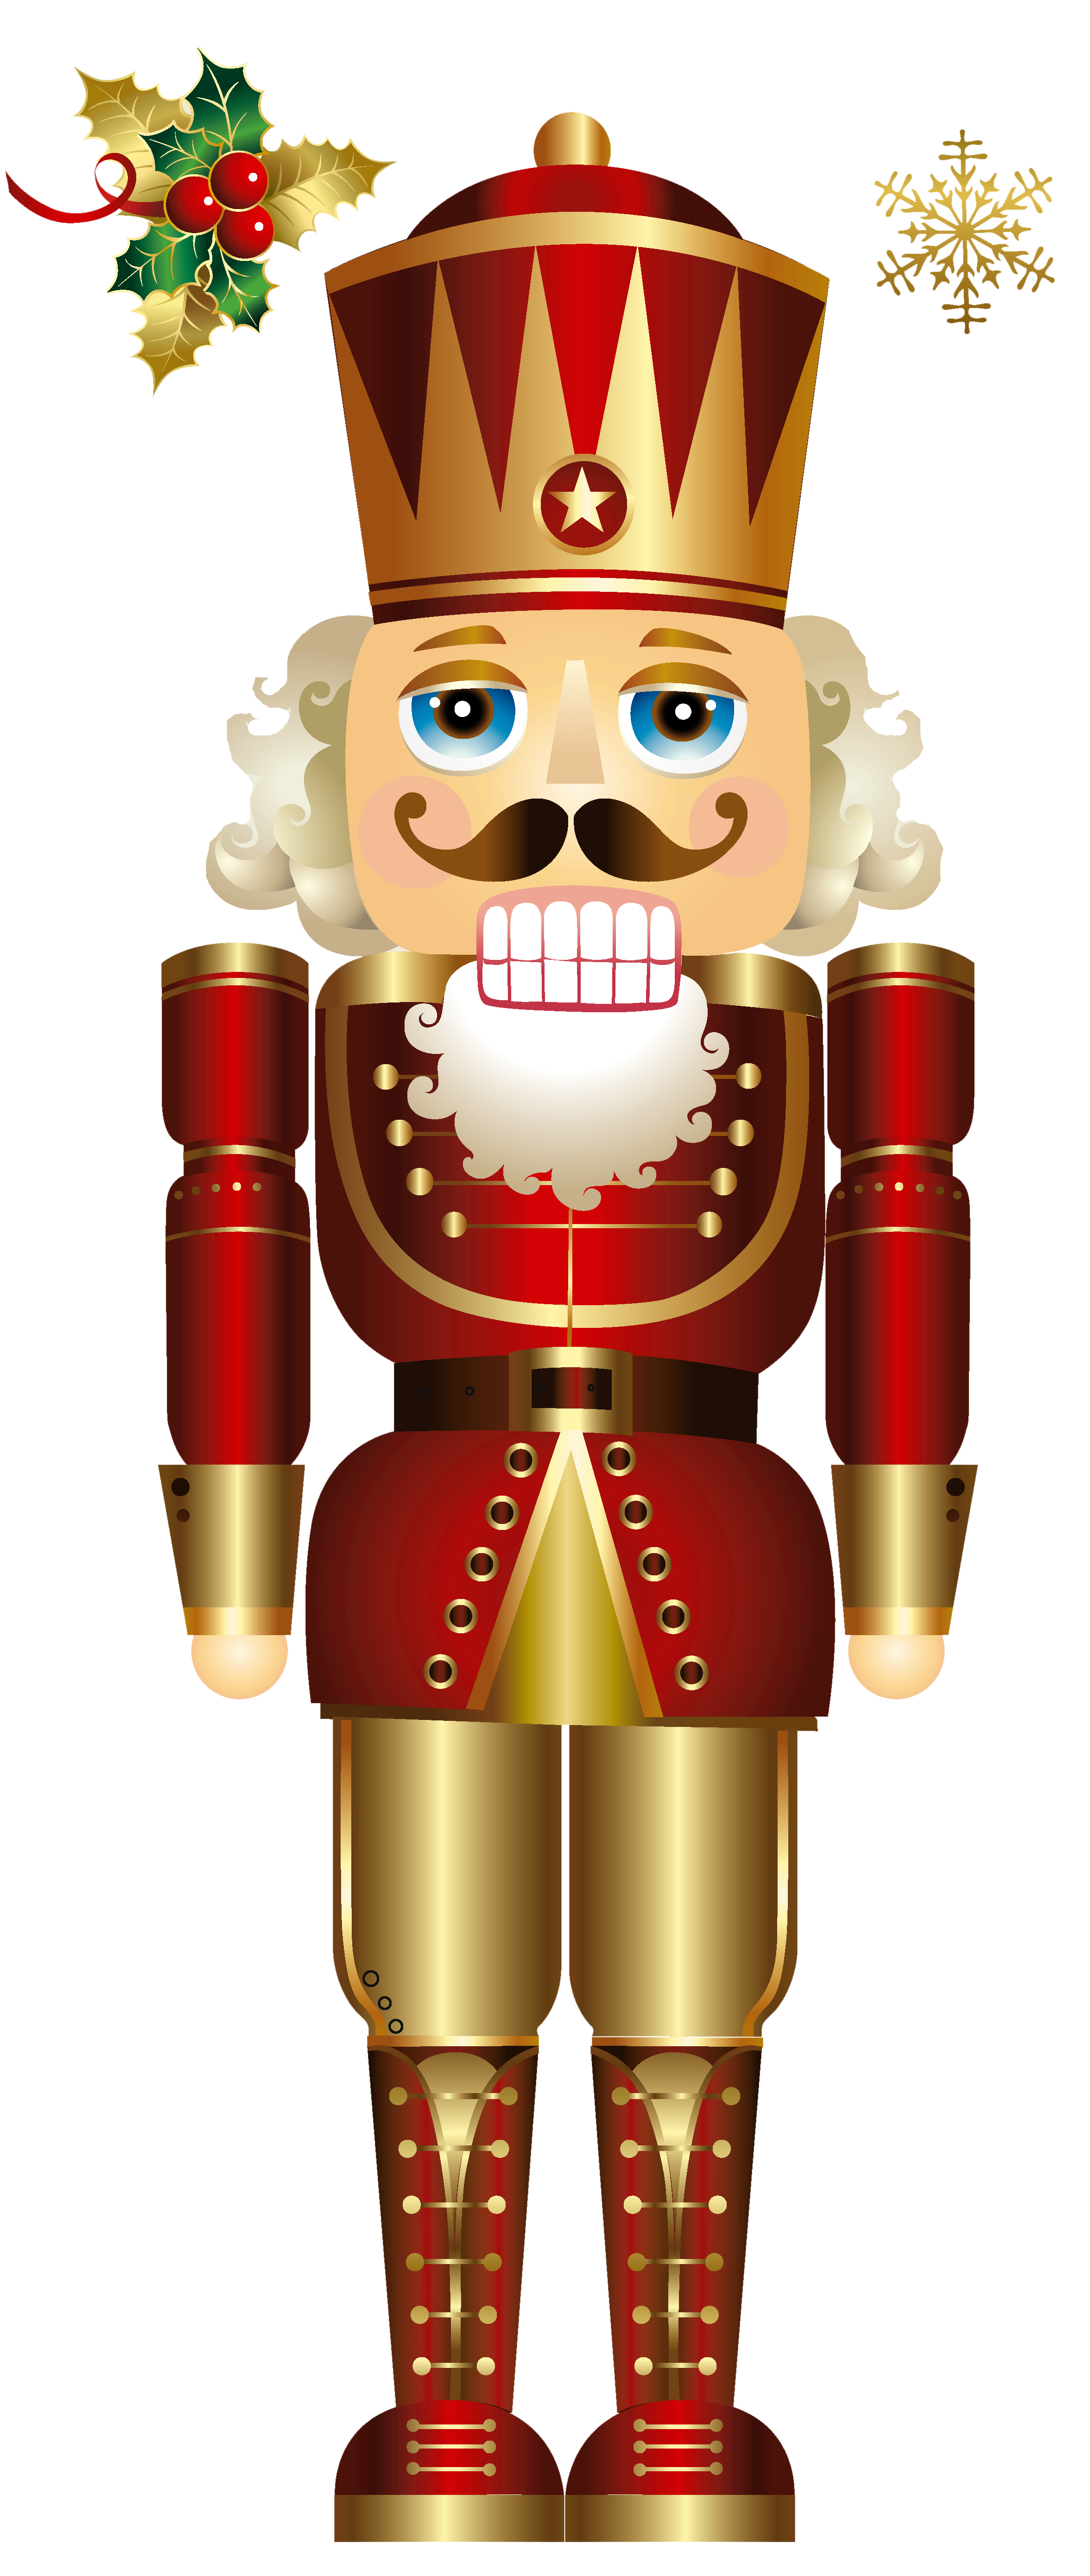 Free christmas adult coloring. Son clipart nutcracker